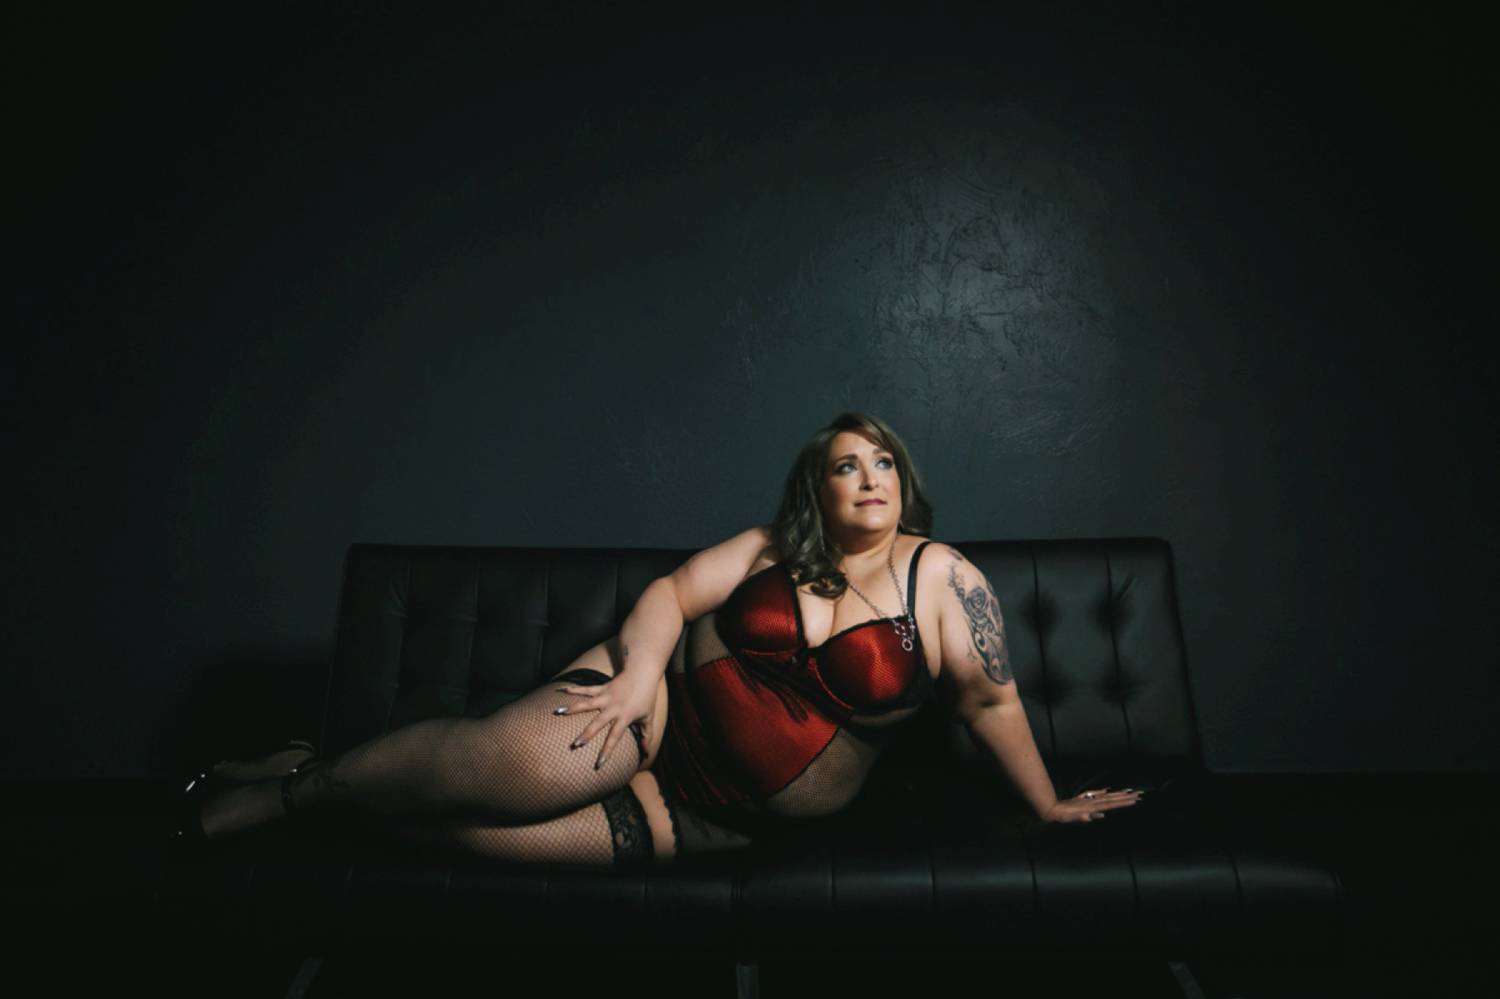 A woman in a red negligee and thigh-high tights reclines on a tufted leather sofa in a dark photography studio.